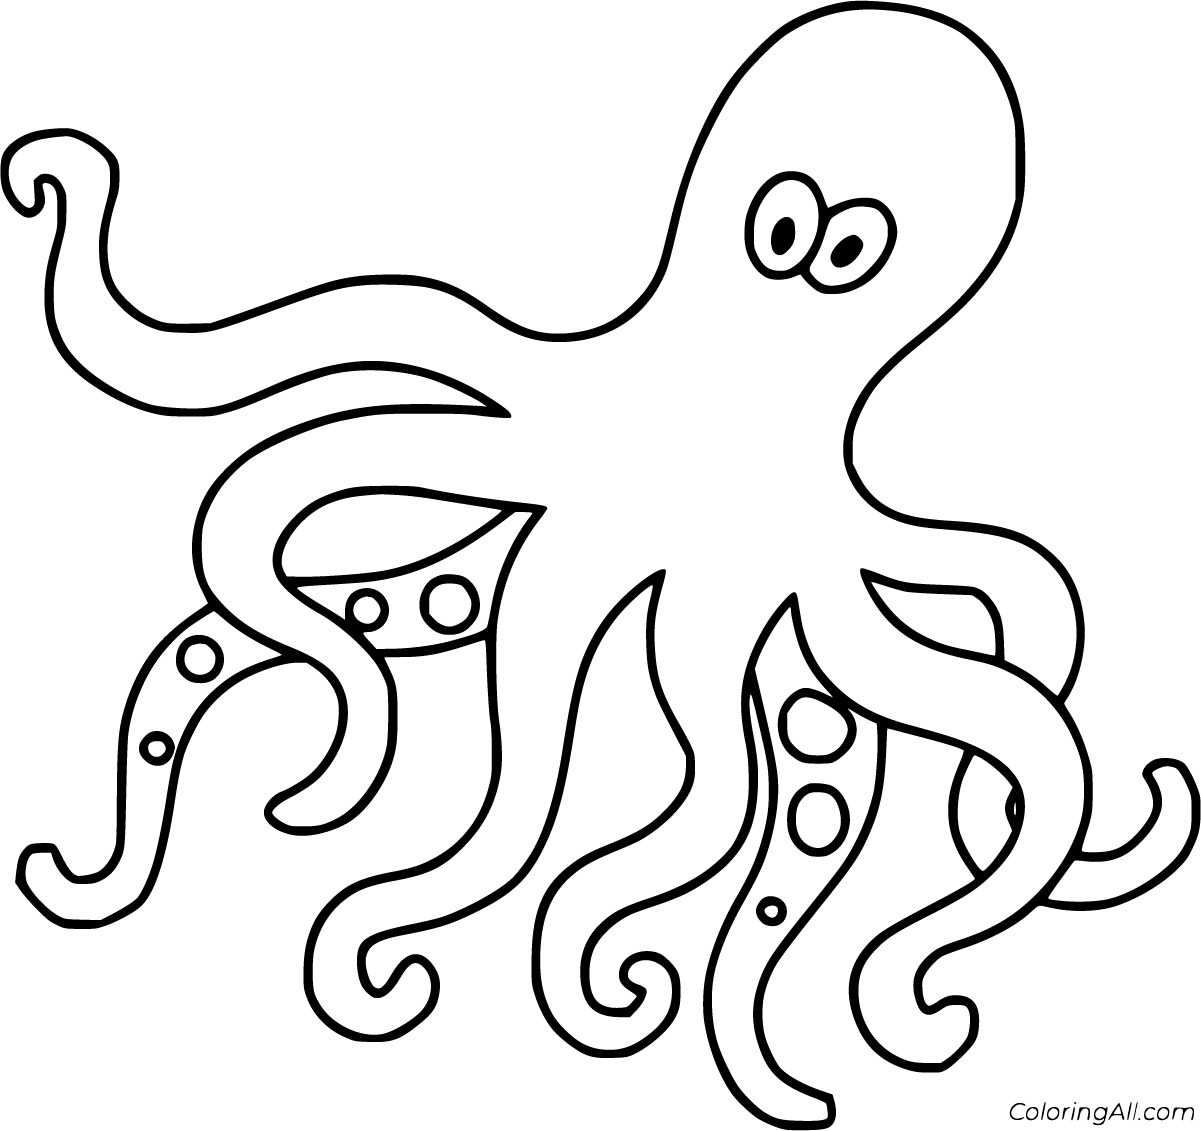 Download Octopus Coloring Pages - ColoringAll